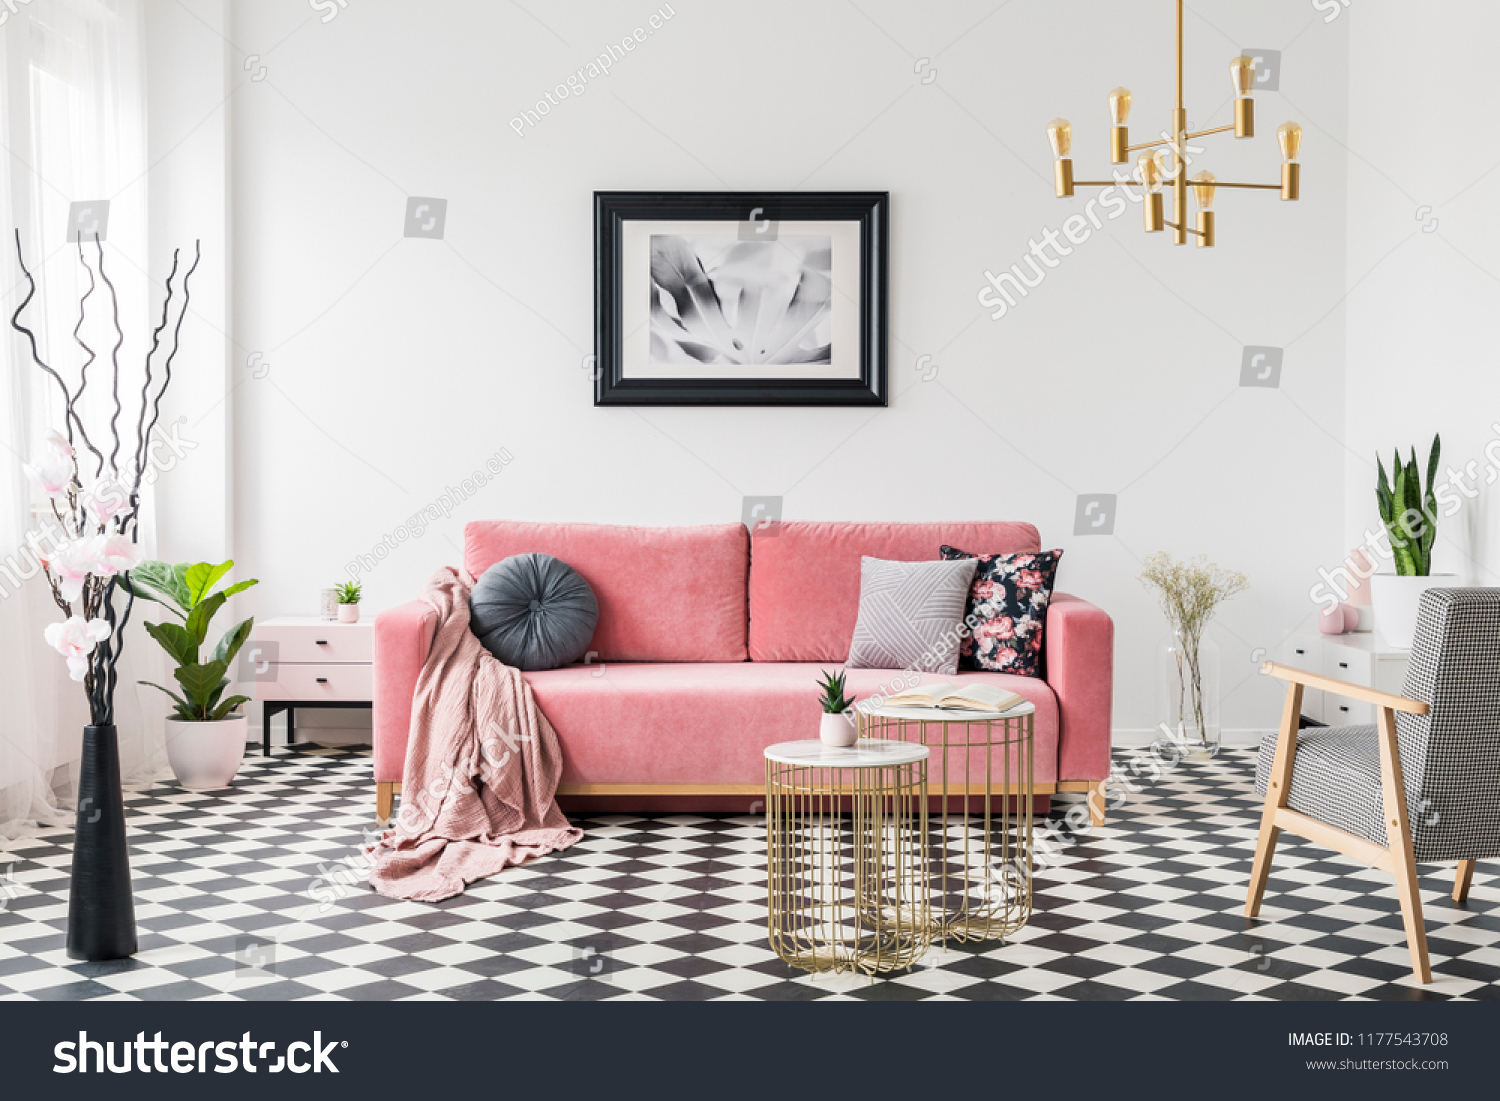 Poster above pink sofa in spacious living room interior with patterned armchair and plants. Real photo #1177543708